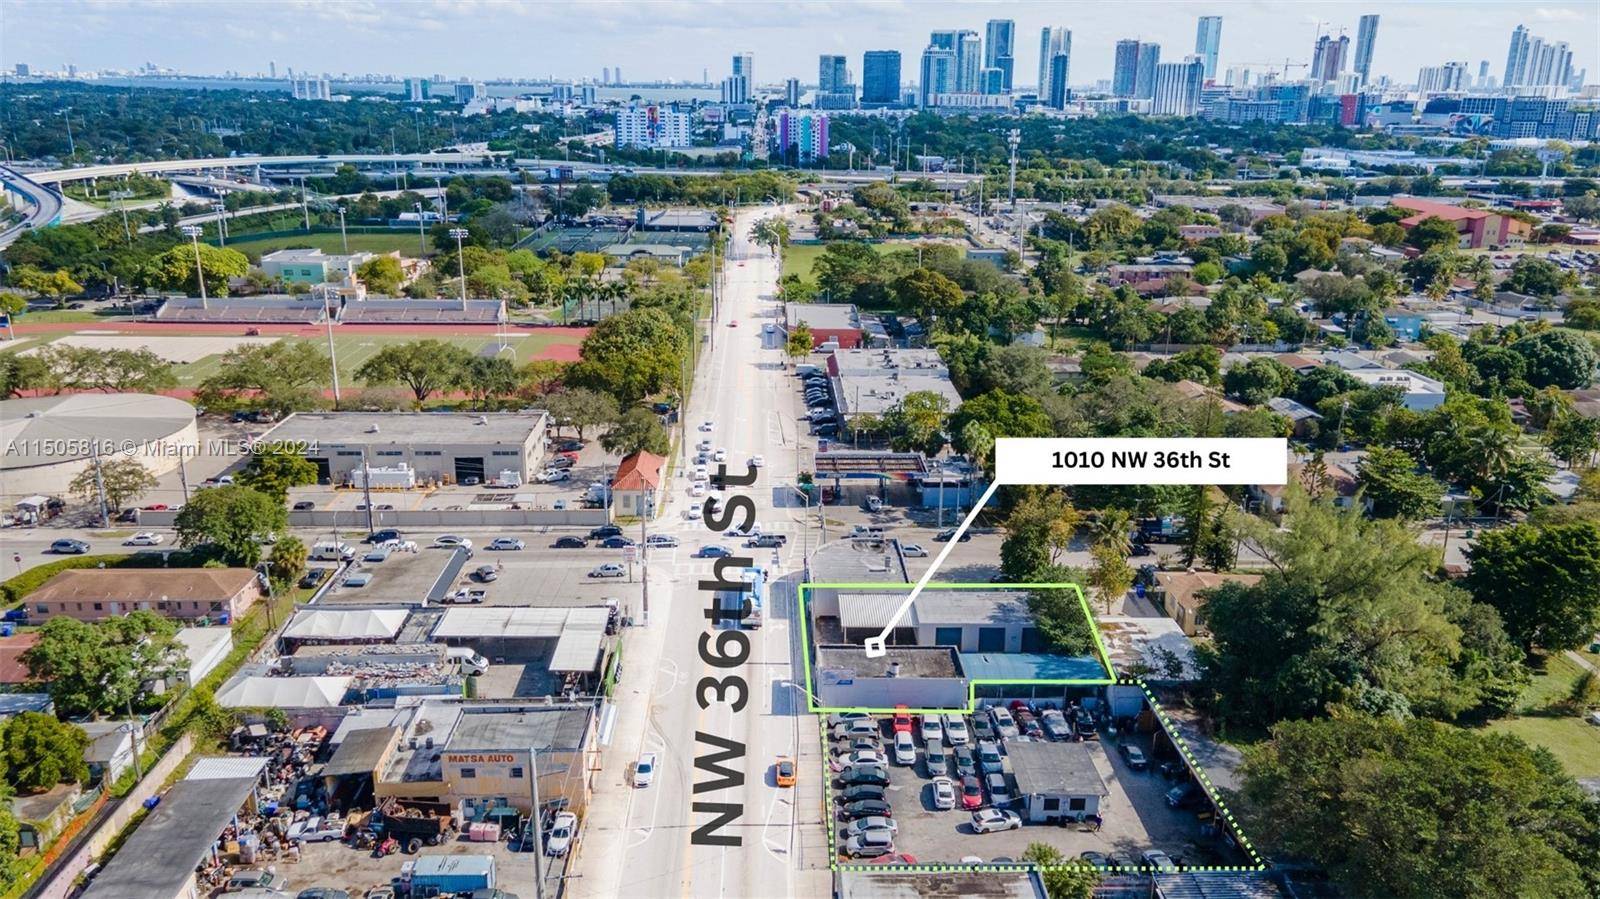 Explore the potential at 1010 1020 NW 36 ST, Miami, with two properties totaling 21, 400 sqft for your automotive business.